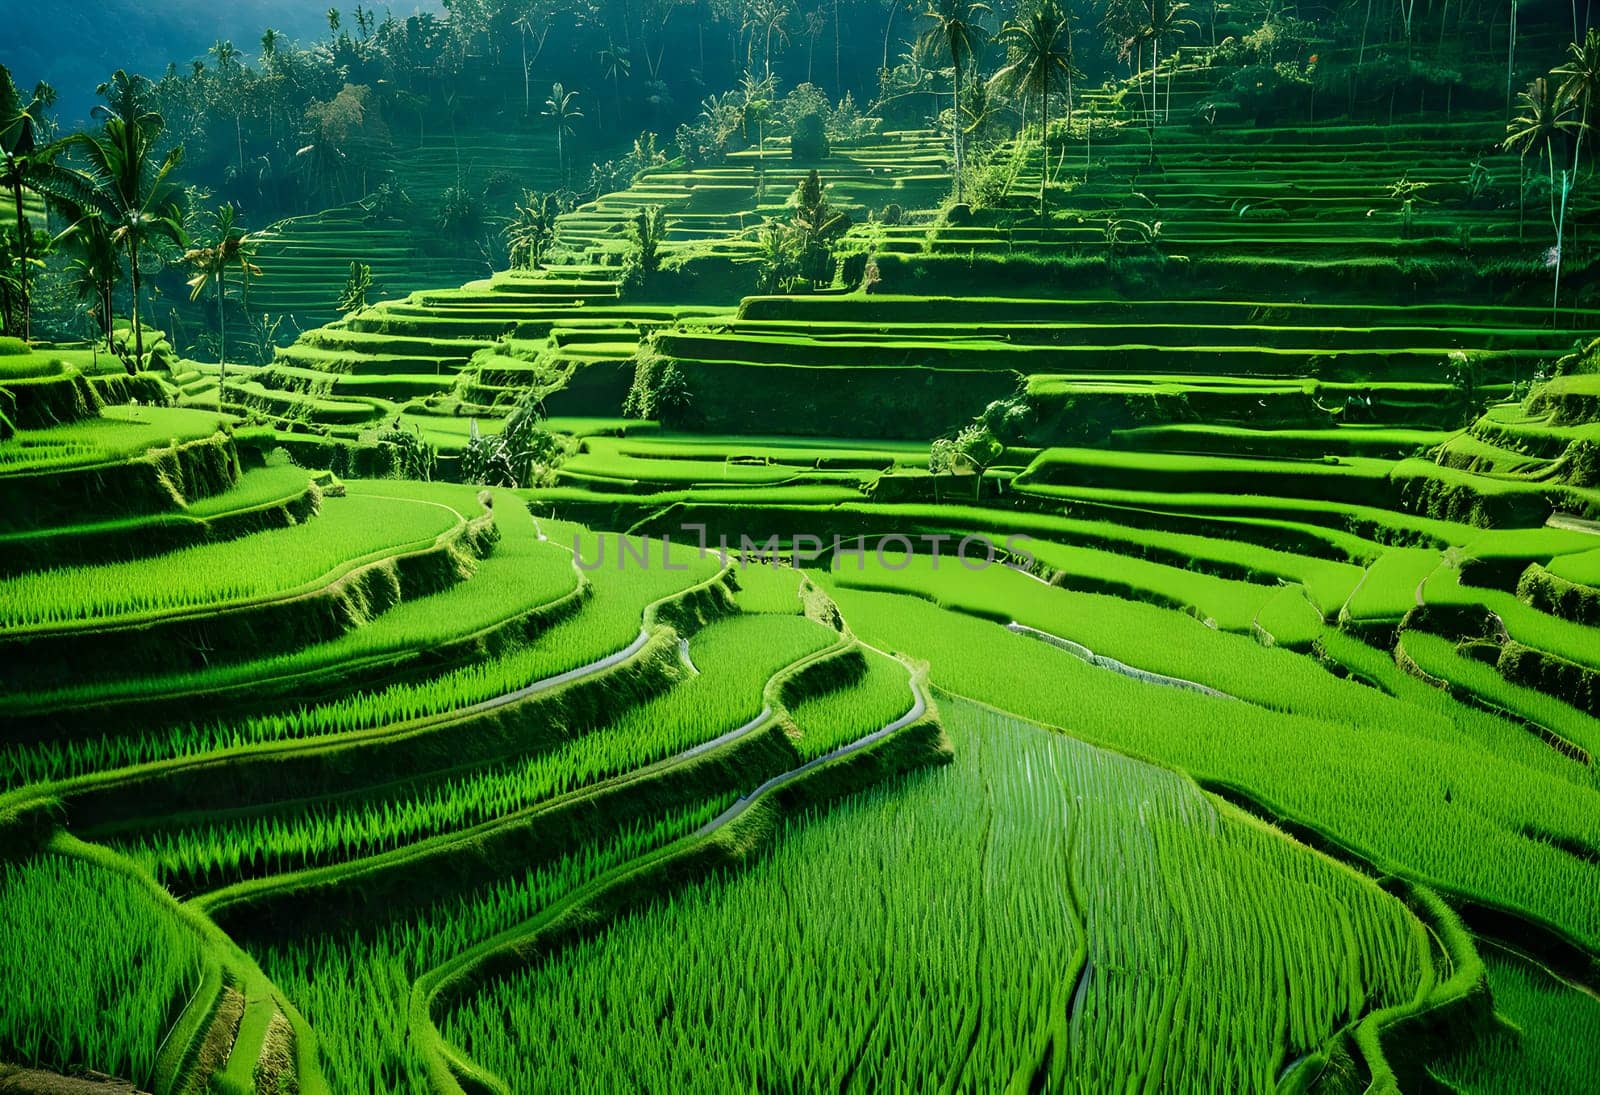 Bali's Emerald Jewels: A Journey Through the Stunning Rice Terraces